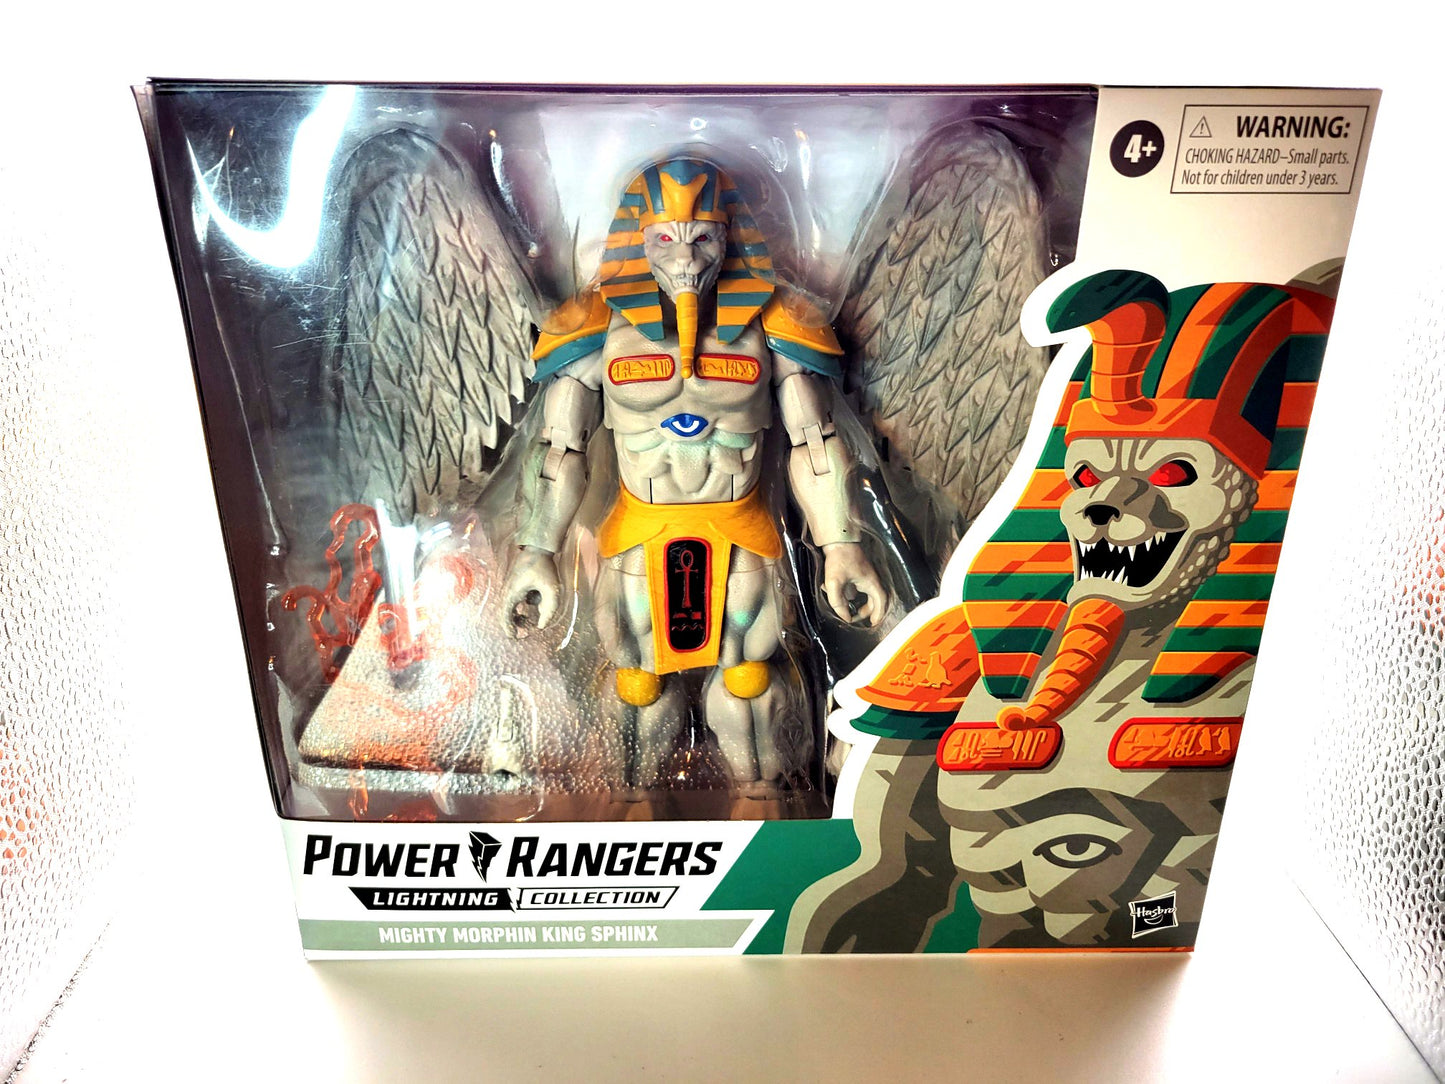 Hasbro Power Rangers Lightning Collection Mighty Morphin King Sphinx Action Figure